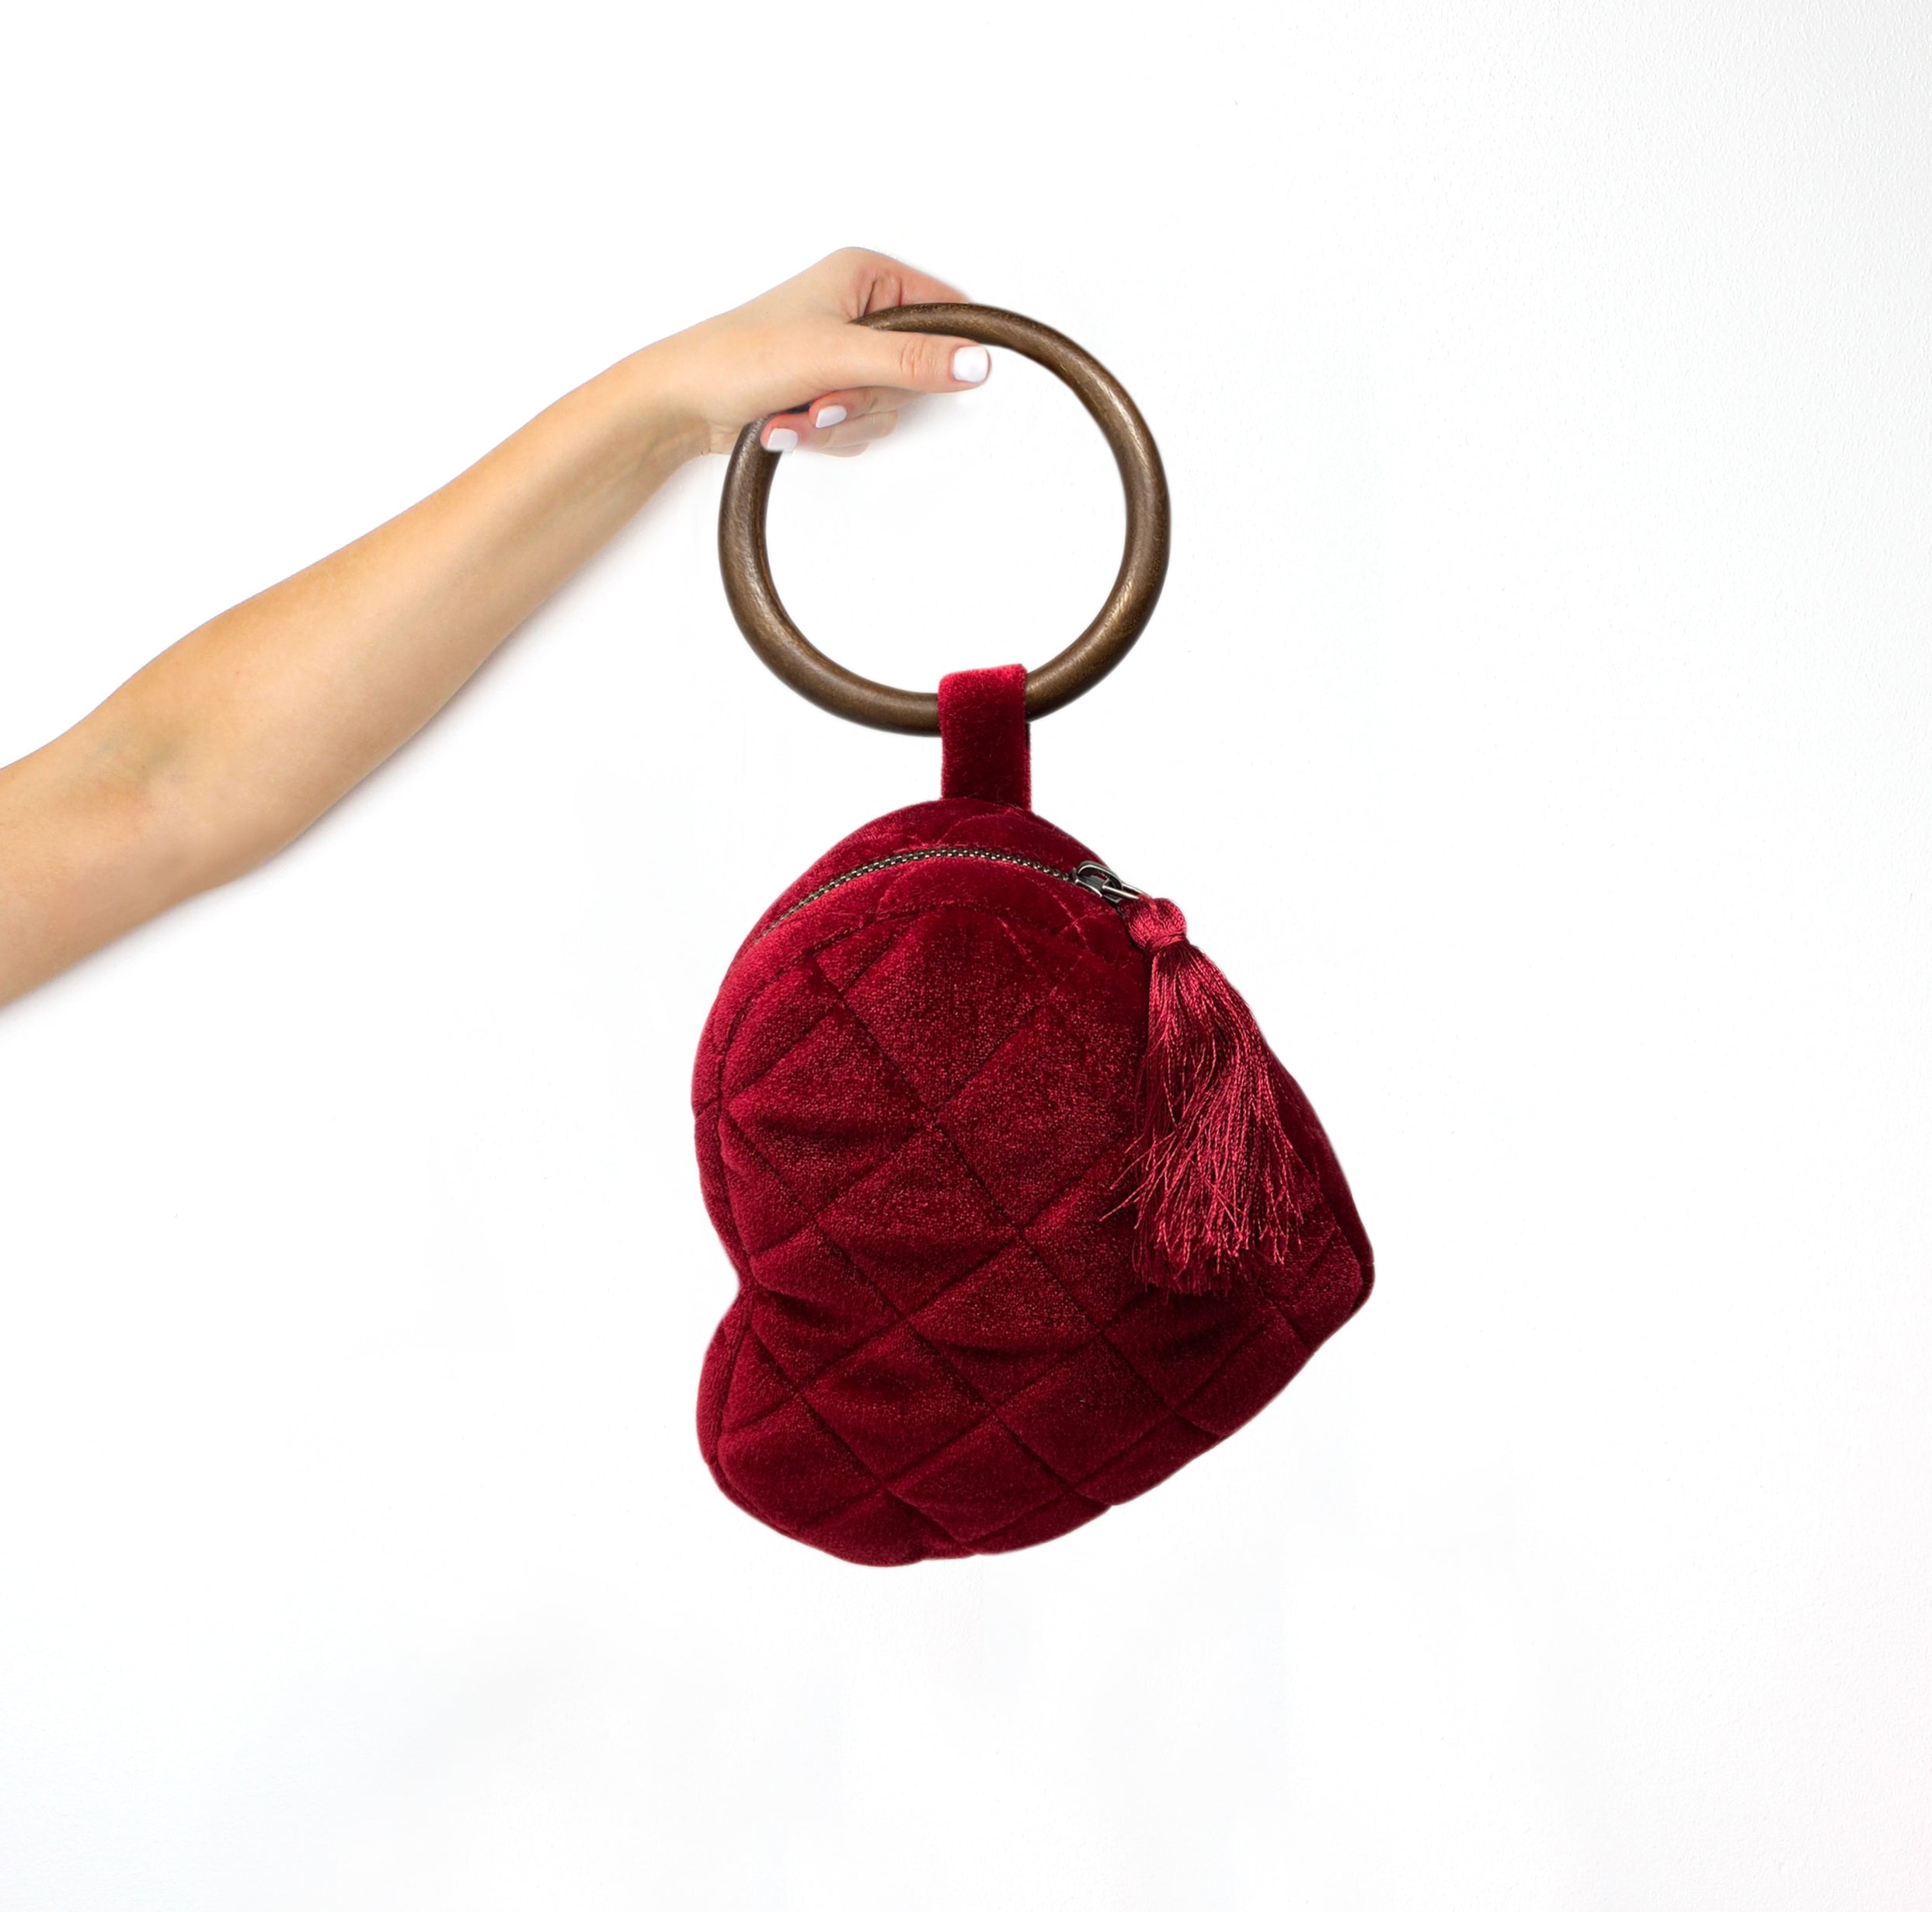 Amore Beaute red heart purse makes a wonderful gift for yourself or a loved one. 